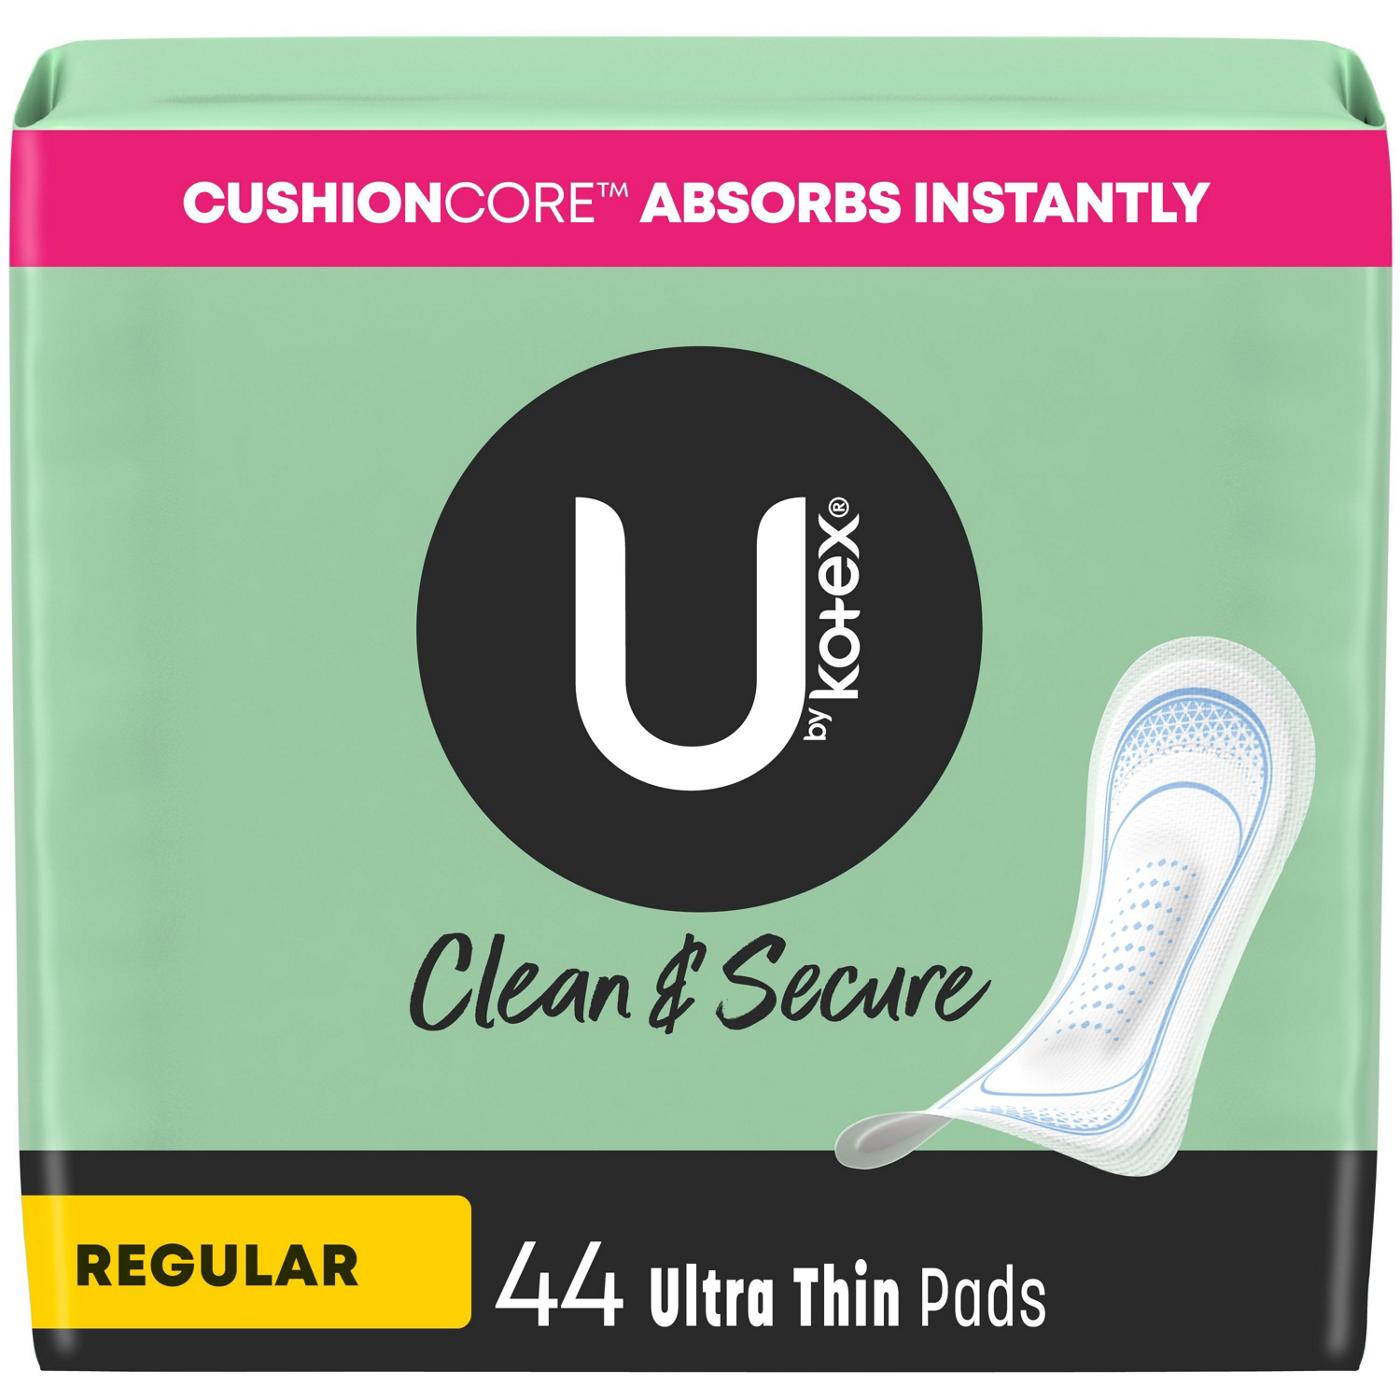 U by Kotex Clean & Secure Ultra Thin Pads - Regular; image 1 of 2